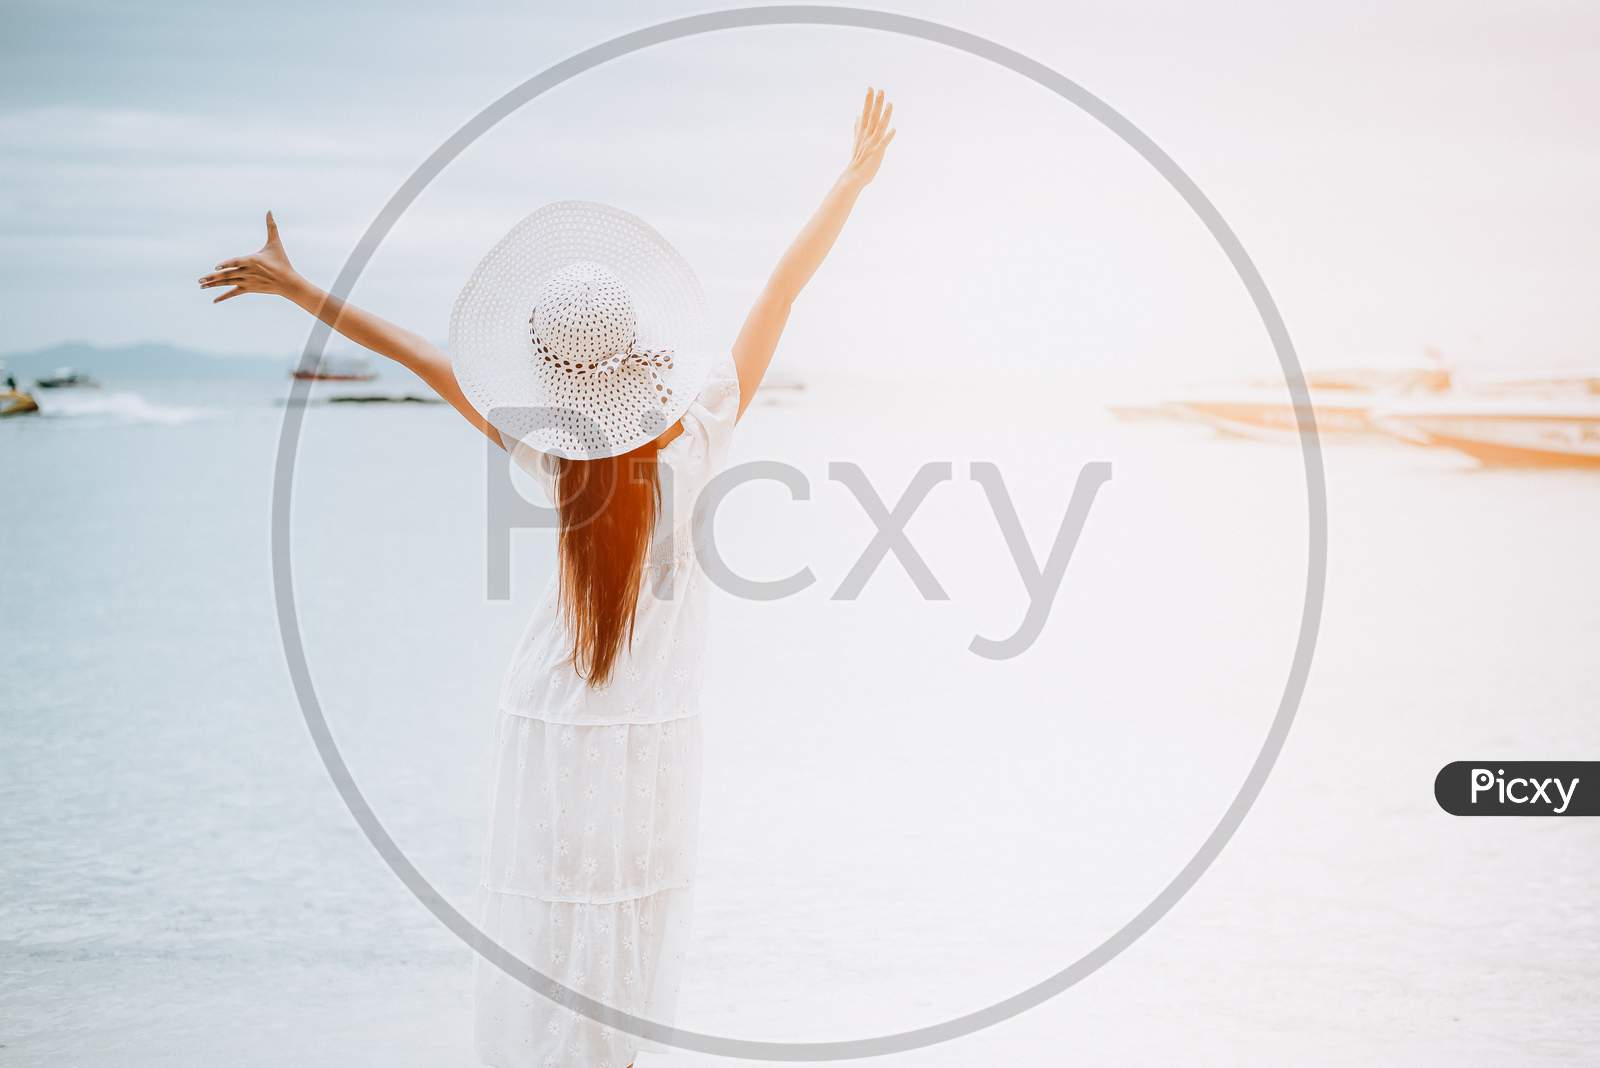 Asian Woman On Beach Enjoying Travel And Fresh Air In Holidays. Vacation And Outdoors Concept. People And Nature Concept. Asian Beauty And Sea Theme.